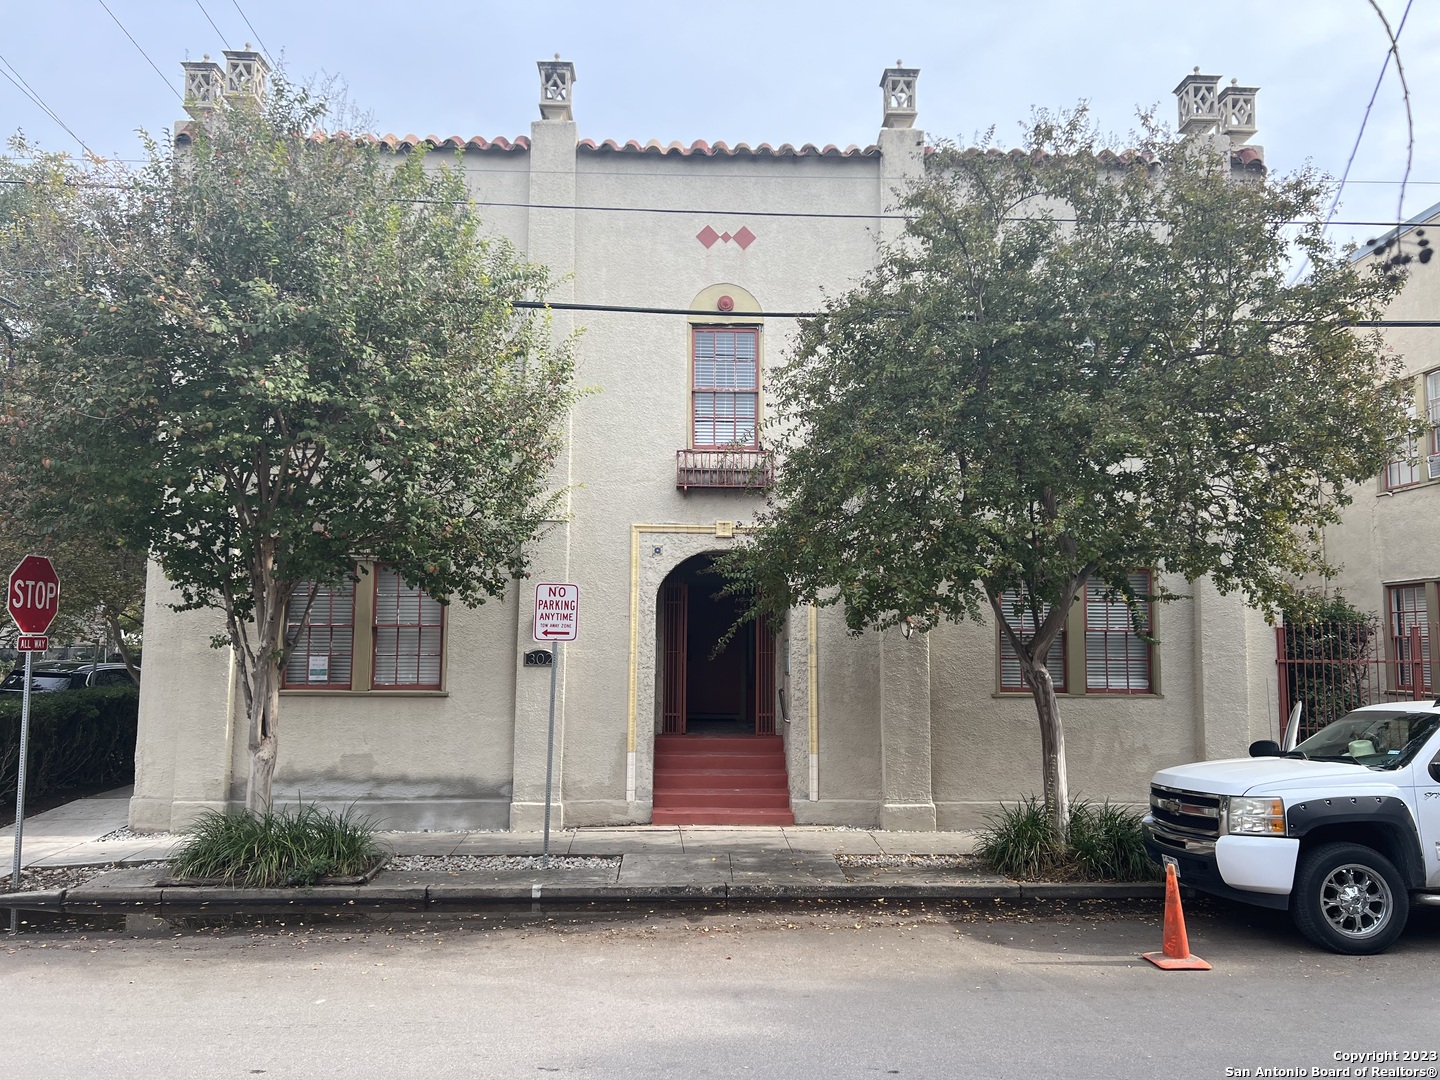 Madison Condos are TRULY in the HEART of King William Historic District in Southtown San Antonio! Several units available ~ Studio, 1 bedroom & 2 bedroom starting at ~ Units starting at $185,000. Enjoy a walkable lifestyle with coffee shops, restaurants, shopping and more just steps from your front door!